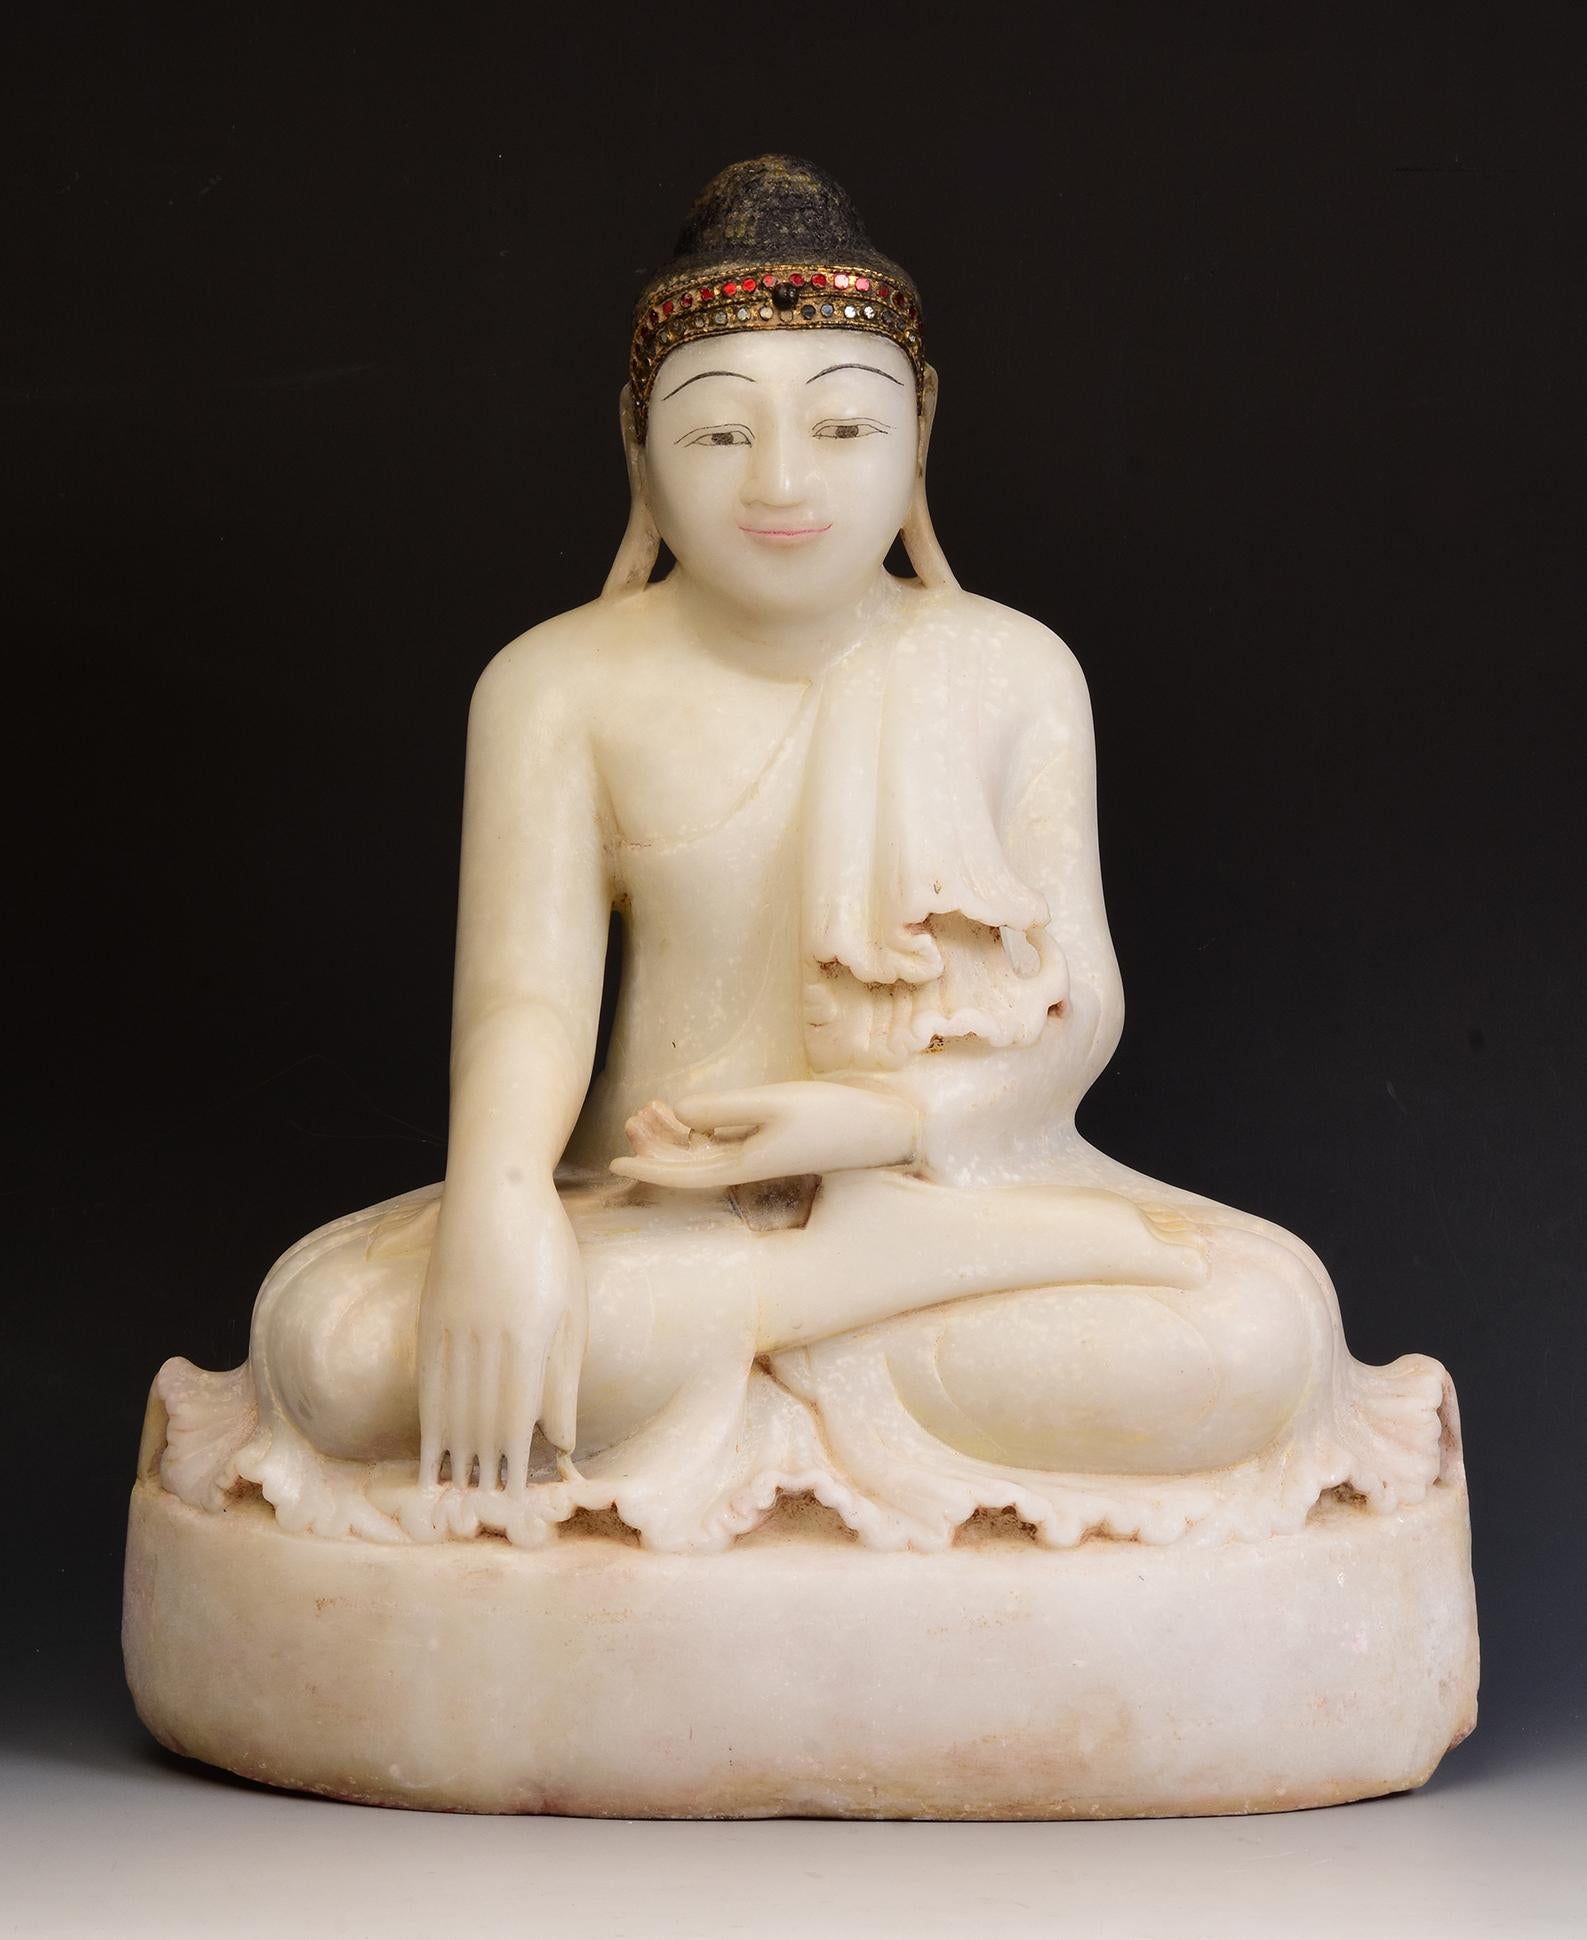 Antique Burmese alabaster Buddha sitting in Mara Vijaya (calling the earth to witness) posture on a base, with inlay of colorful glass pieces on the headband.

Age: Burma, Mandalay Period, 19th Century
Size: Height 54 C.M. / Width 44.2 C.M. / Depth